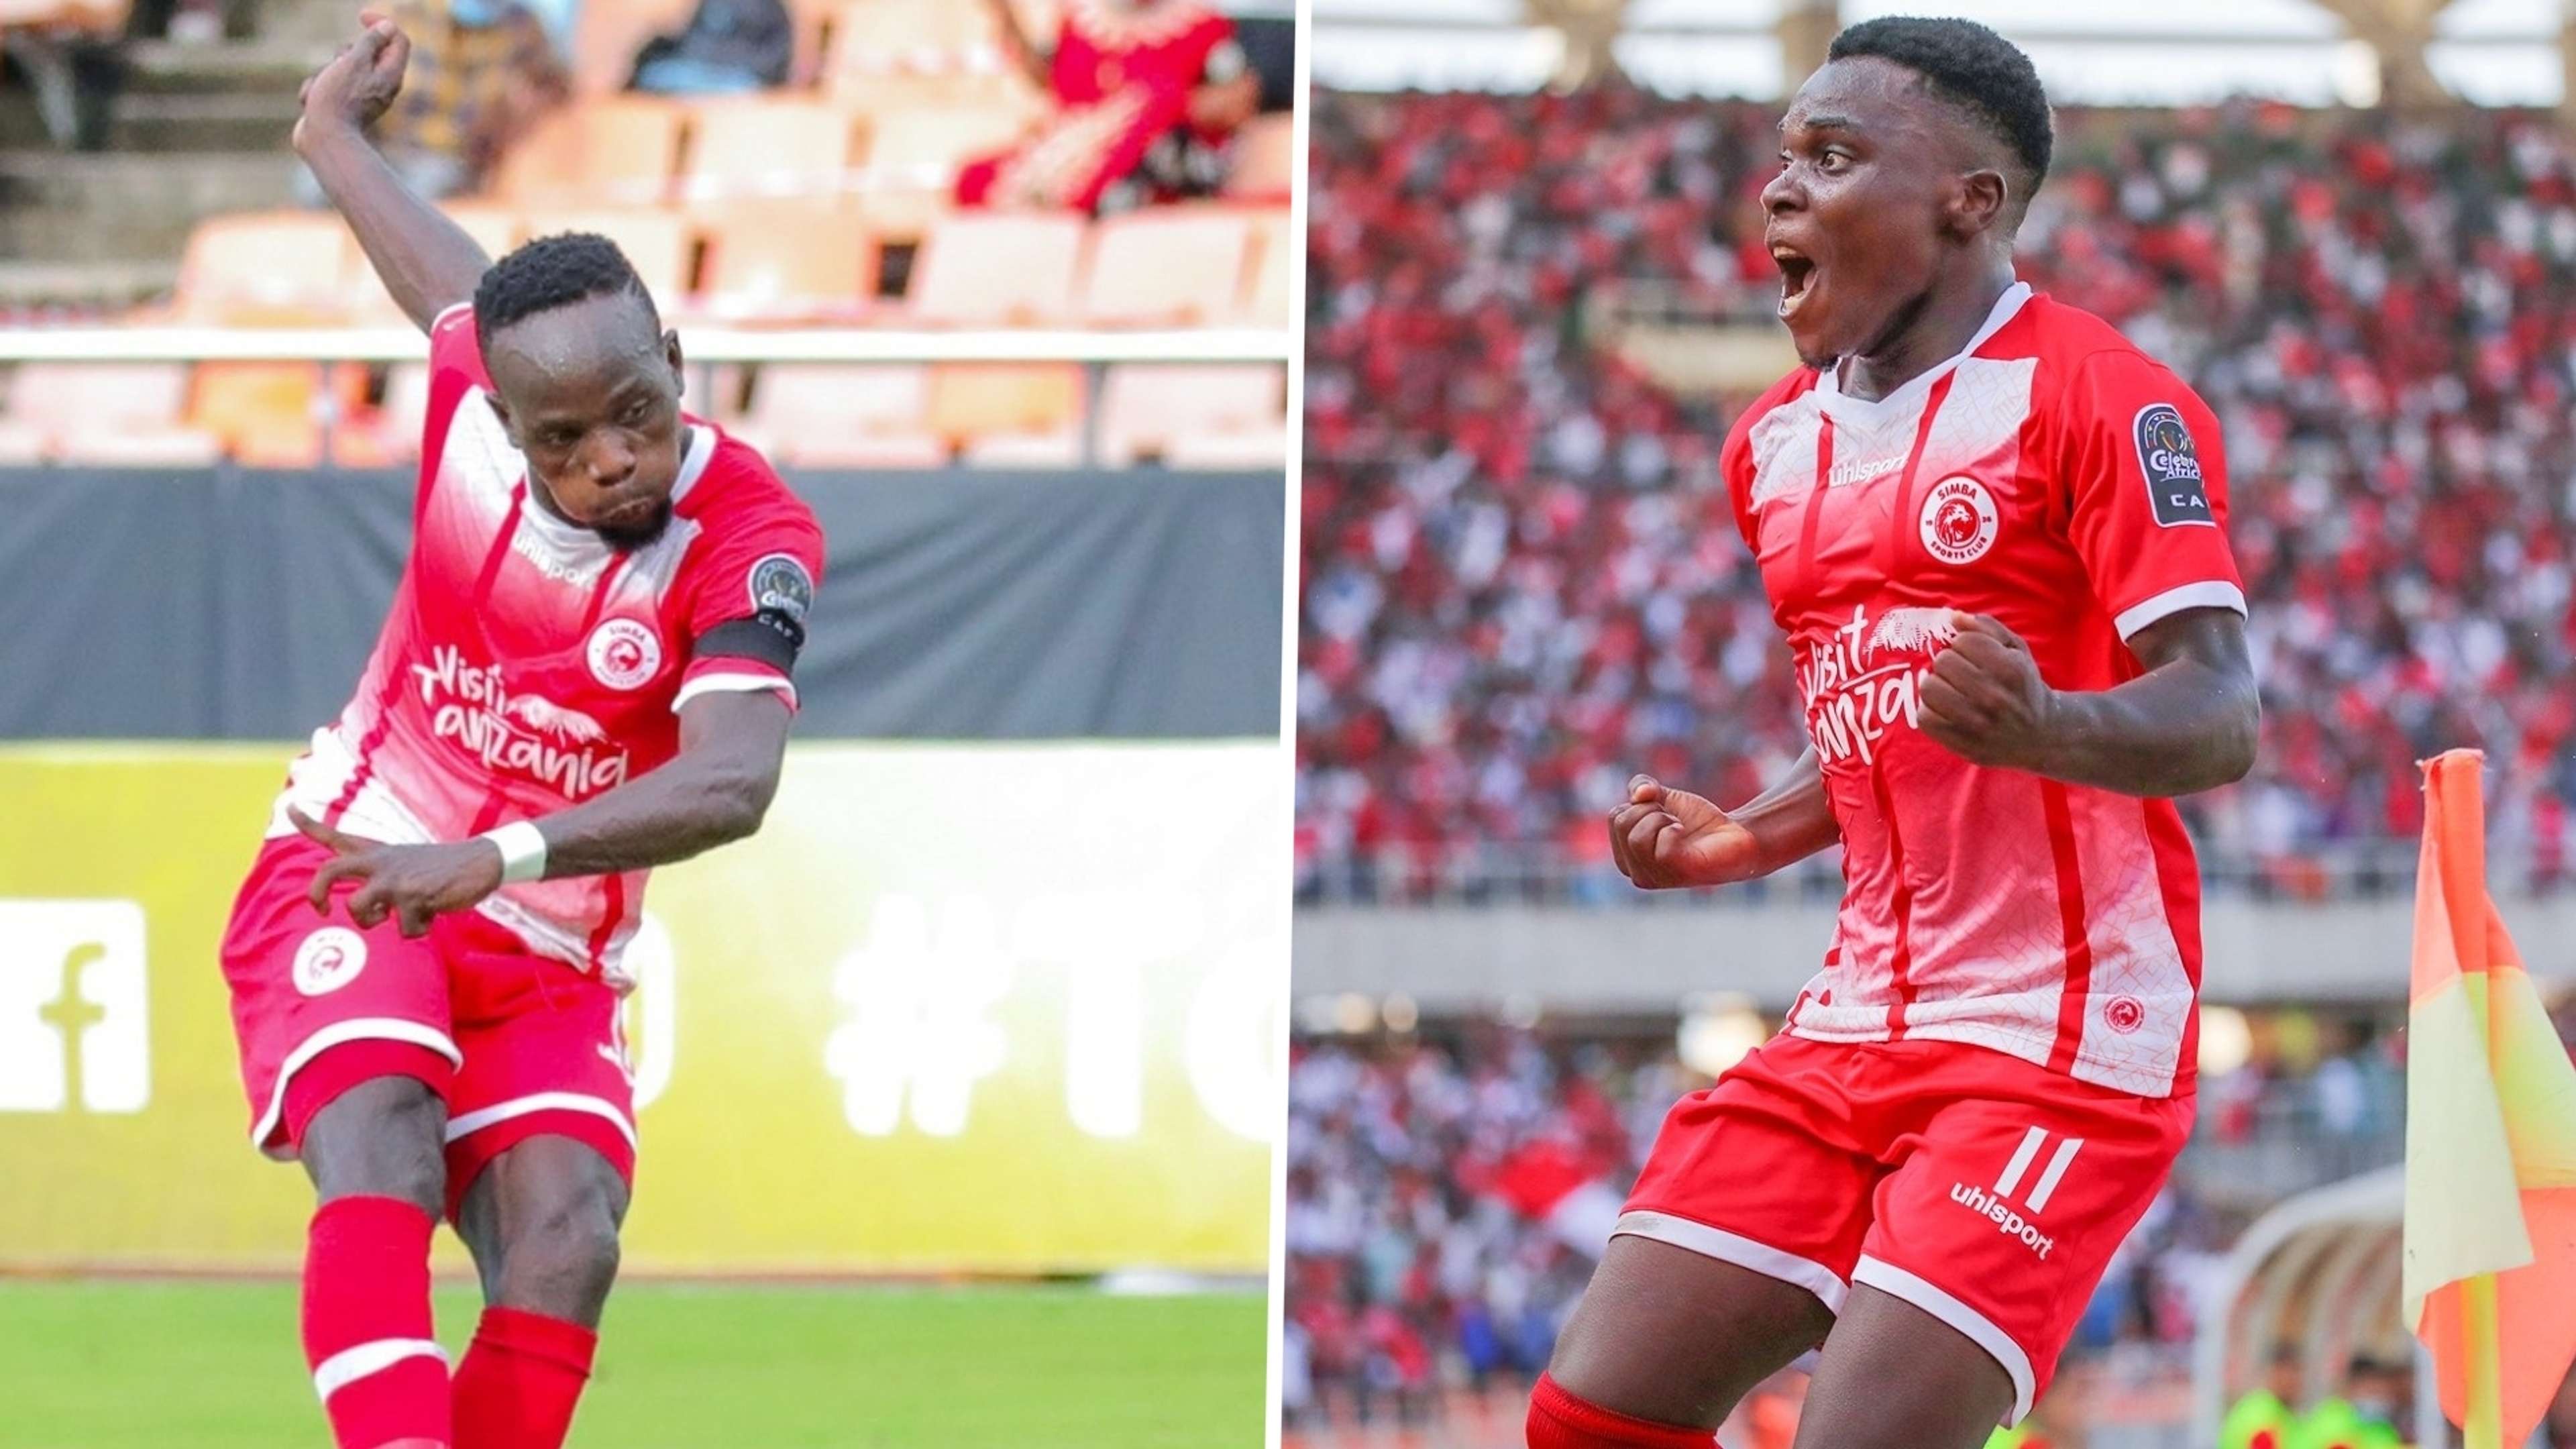 Simba SC players Clatous Chama and Luis Miquissone.